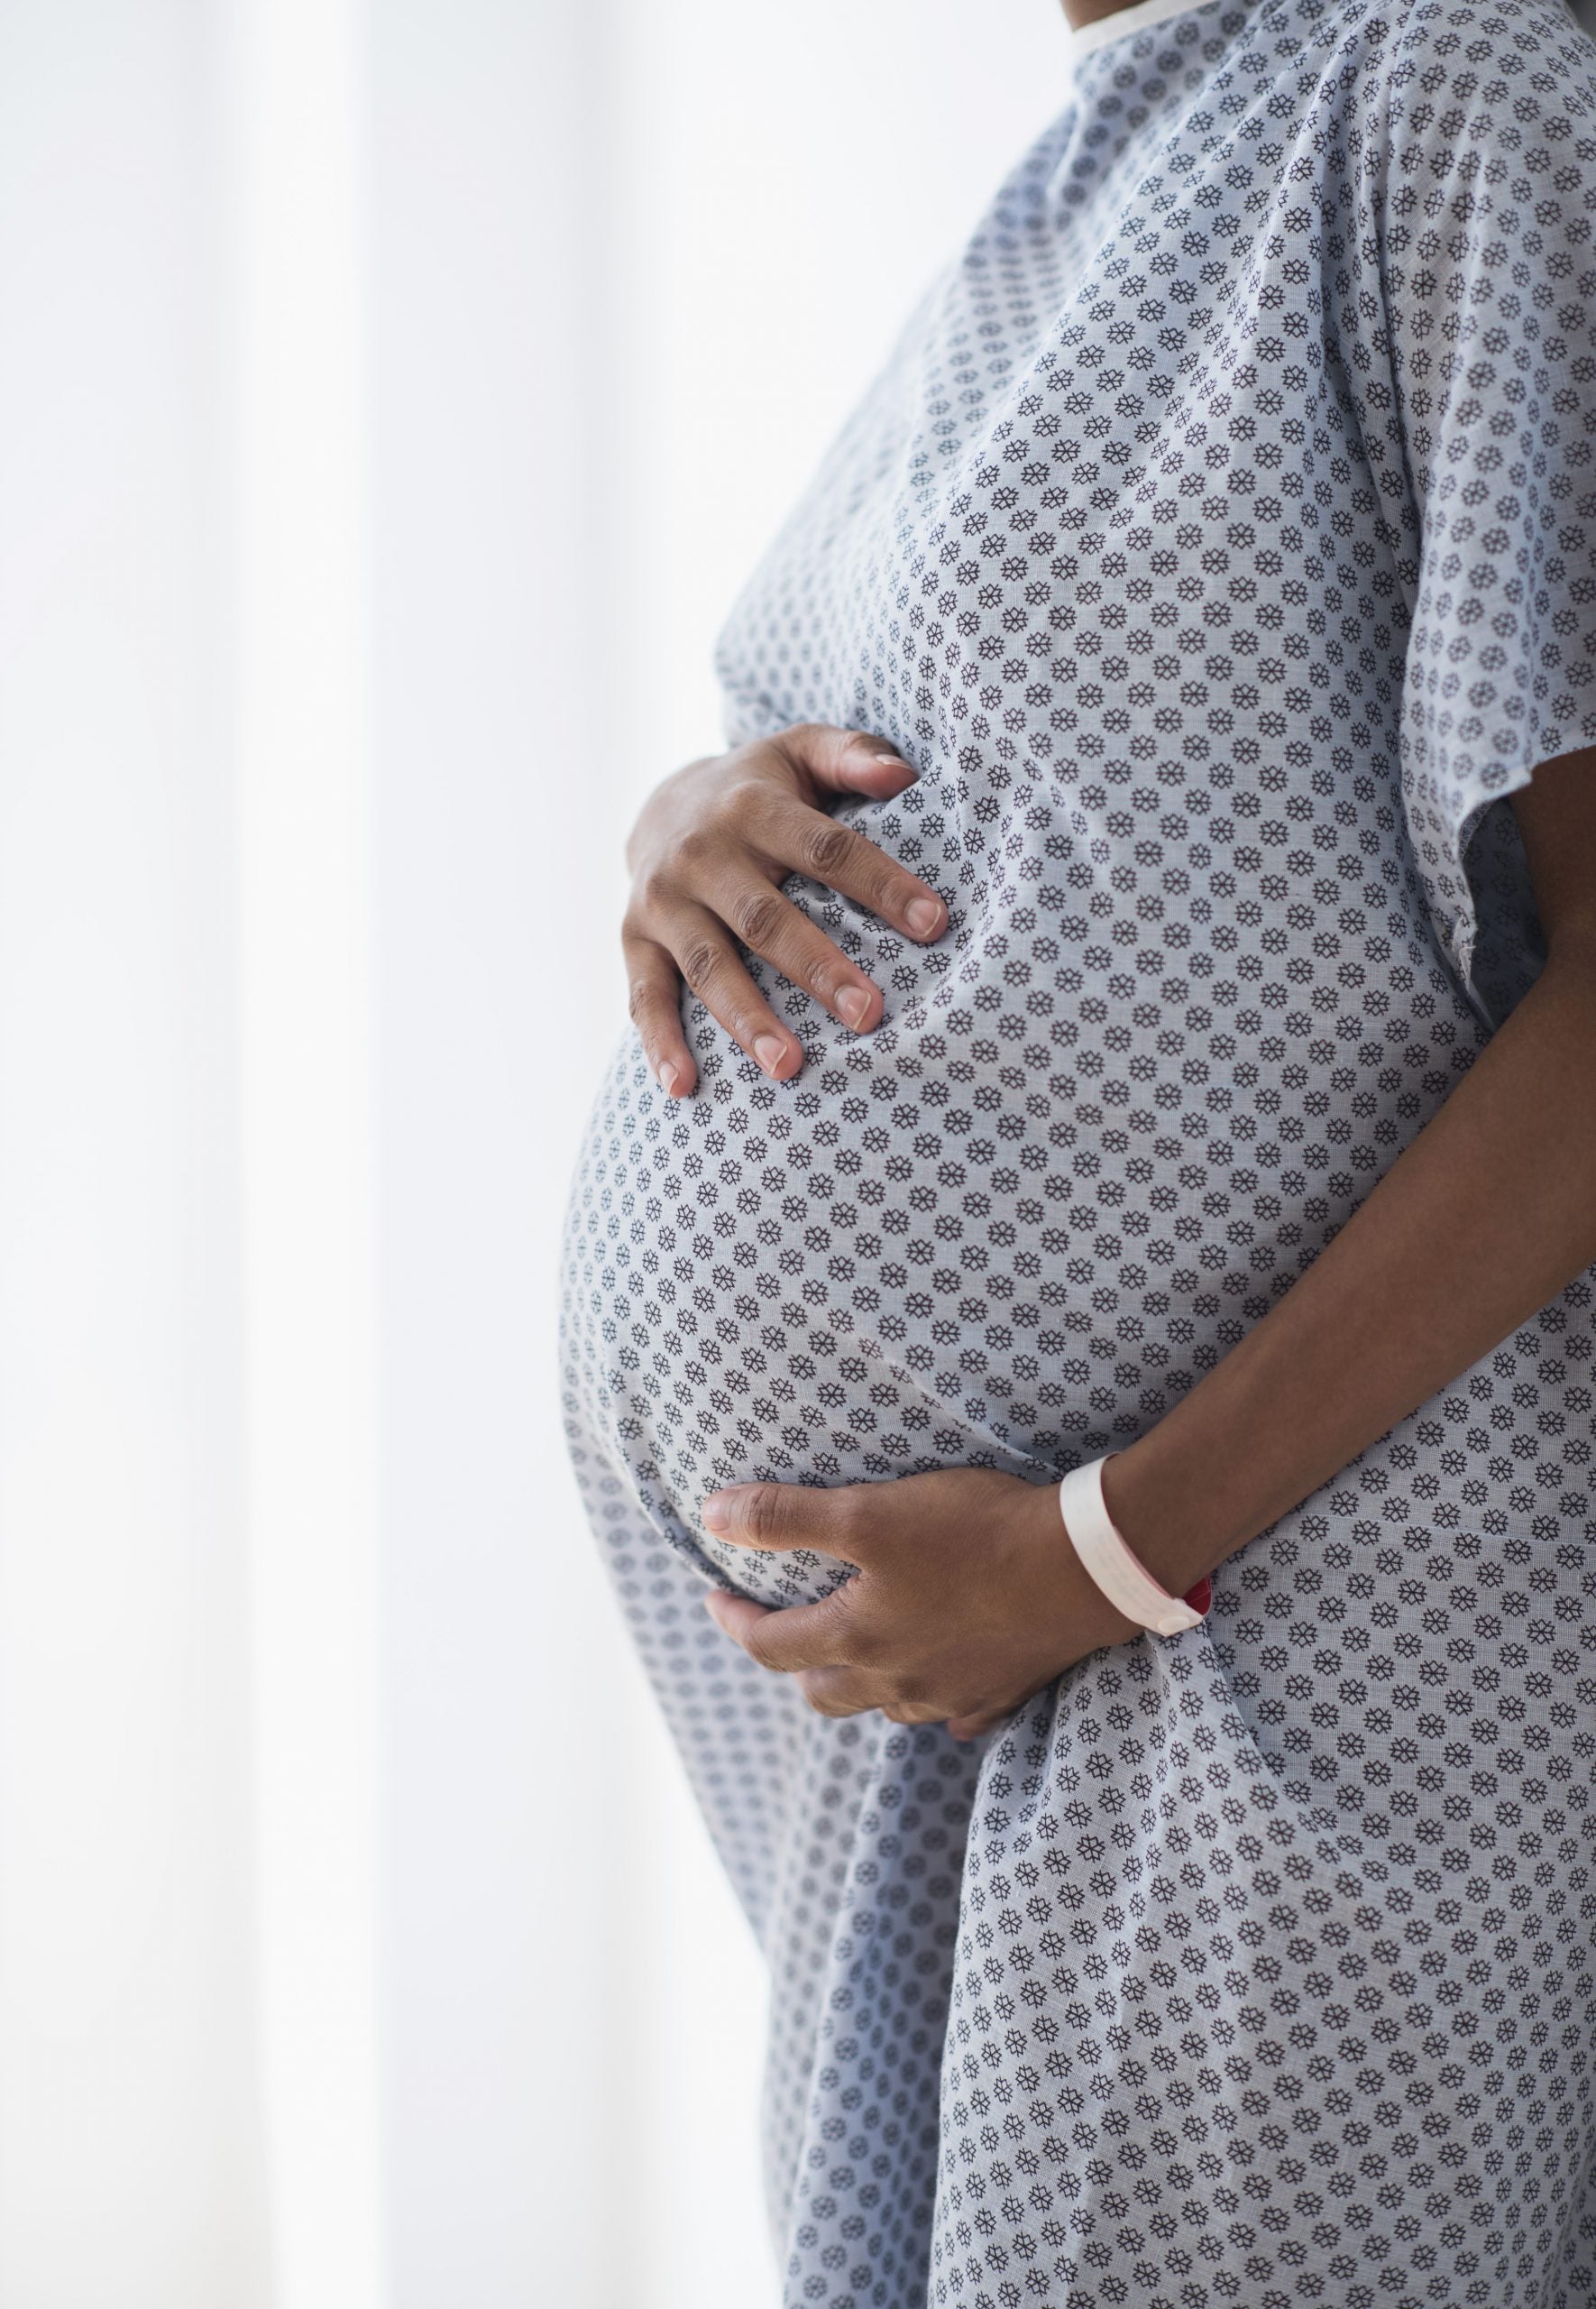 Black Maternal Health Matters! 5 Issues Facing Black Mothers Today